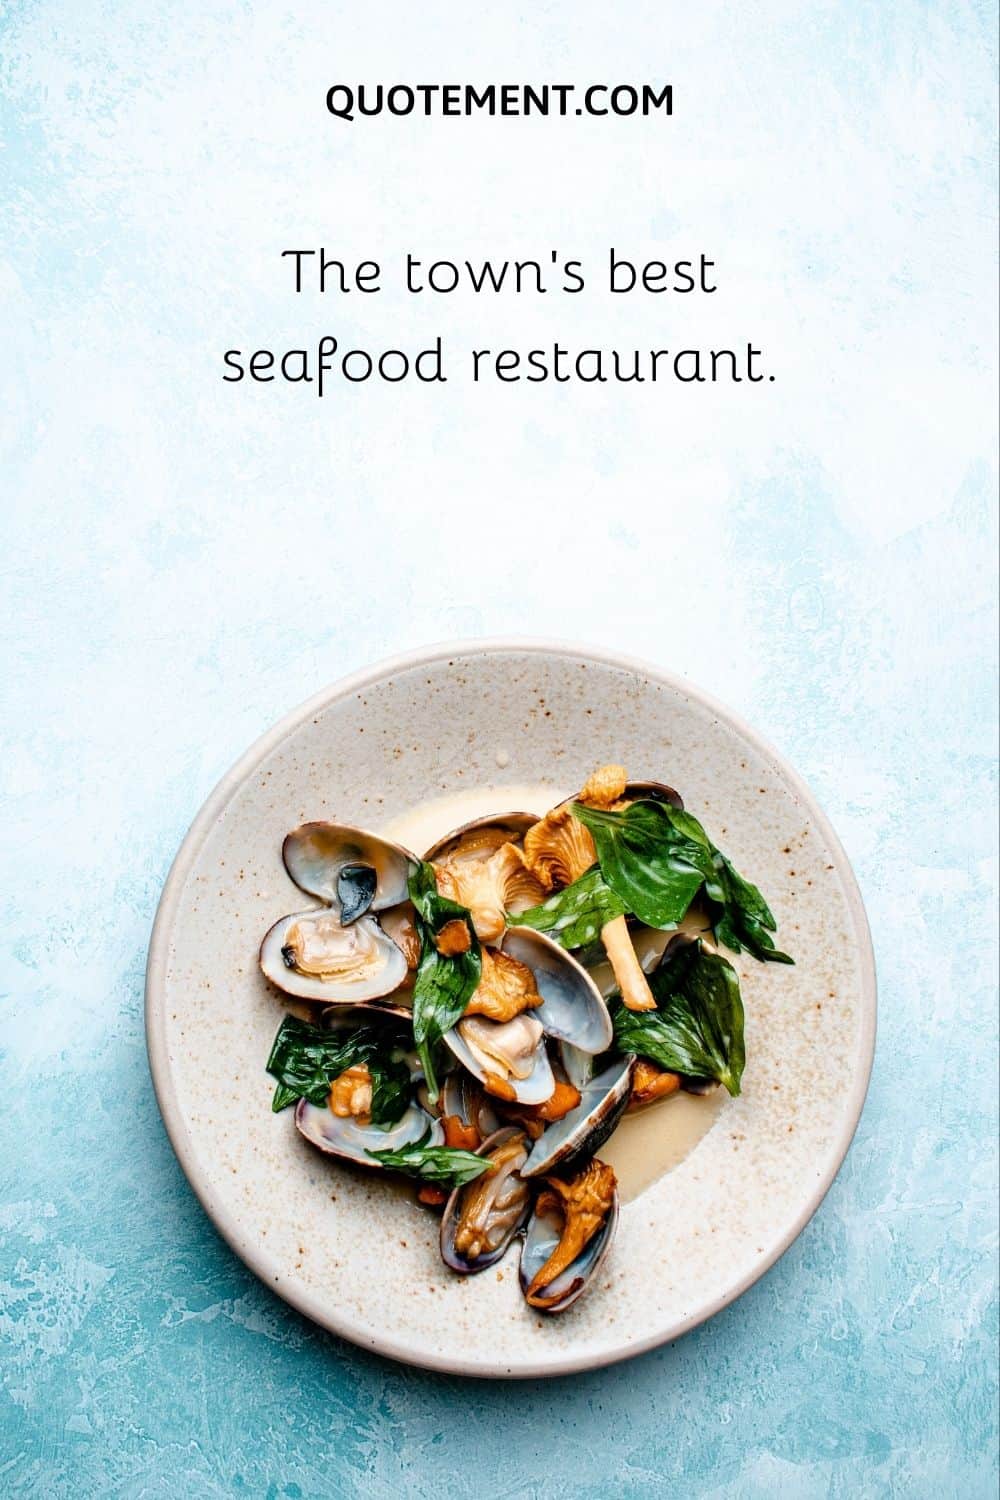 The town’s best seafood restaurant.